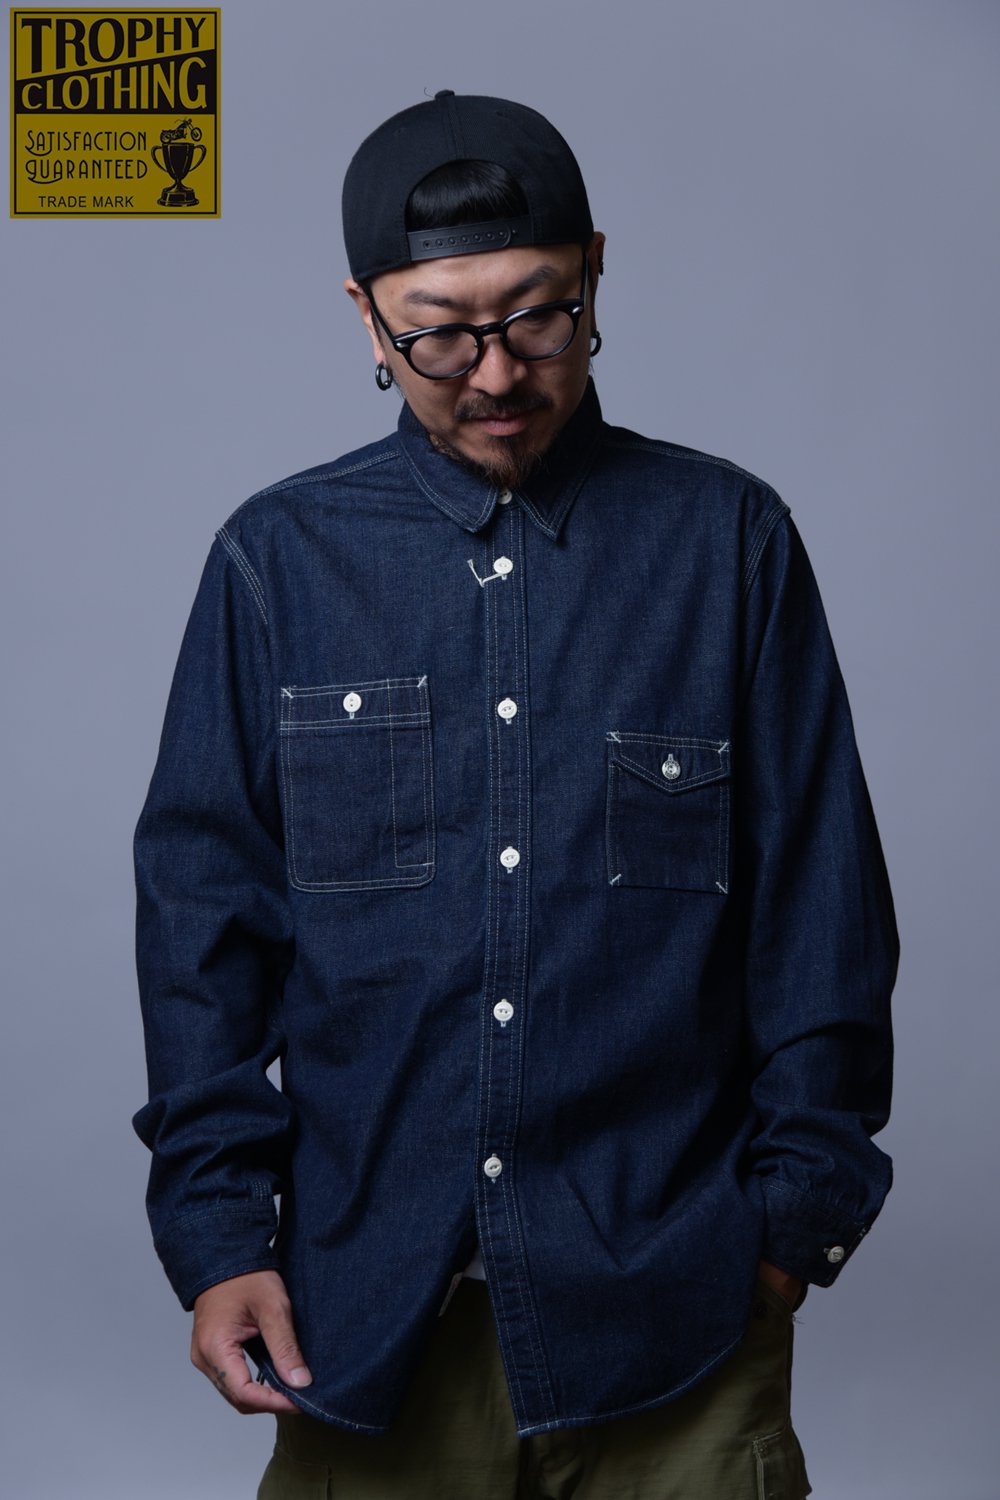 TROPHY CLOTHING(トロフィークロージング) セルビッチニムシャツ MACHINE AGE SHIRT -ONE WASH-  TR22AW-401 通販正規取扱 | ハーレムストア公式通販サイト